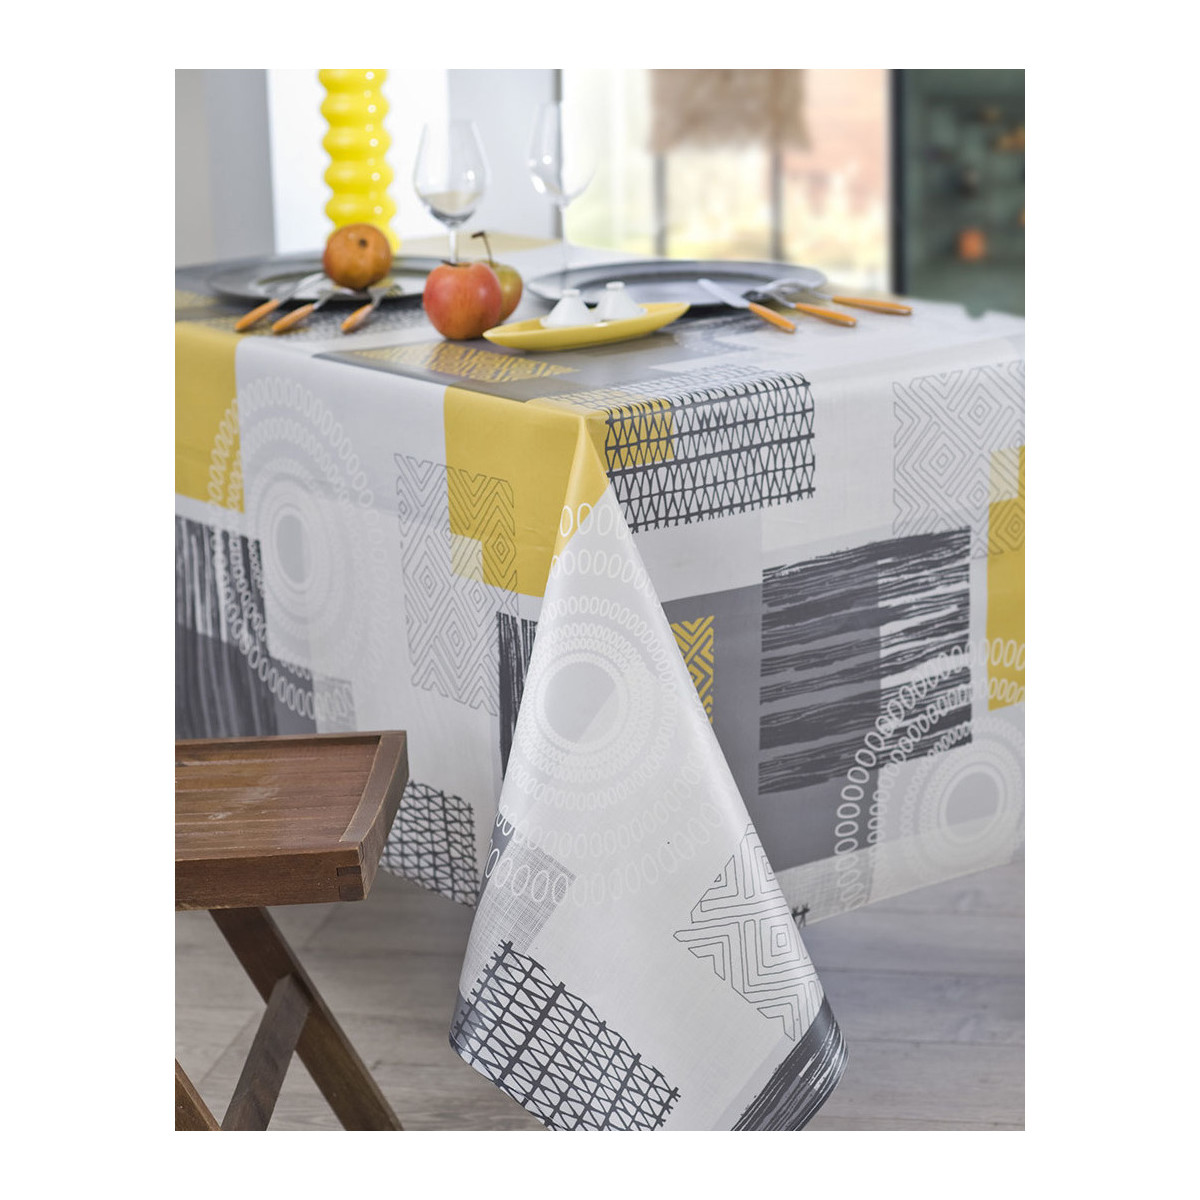 Home Napkin / table cloth / place mats Nydel MAGIC Ethnic